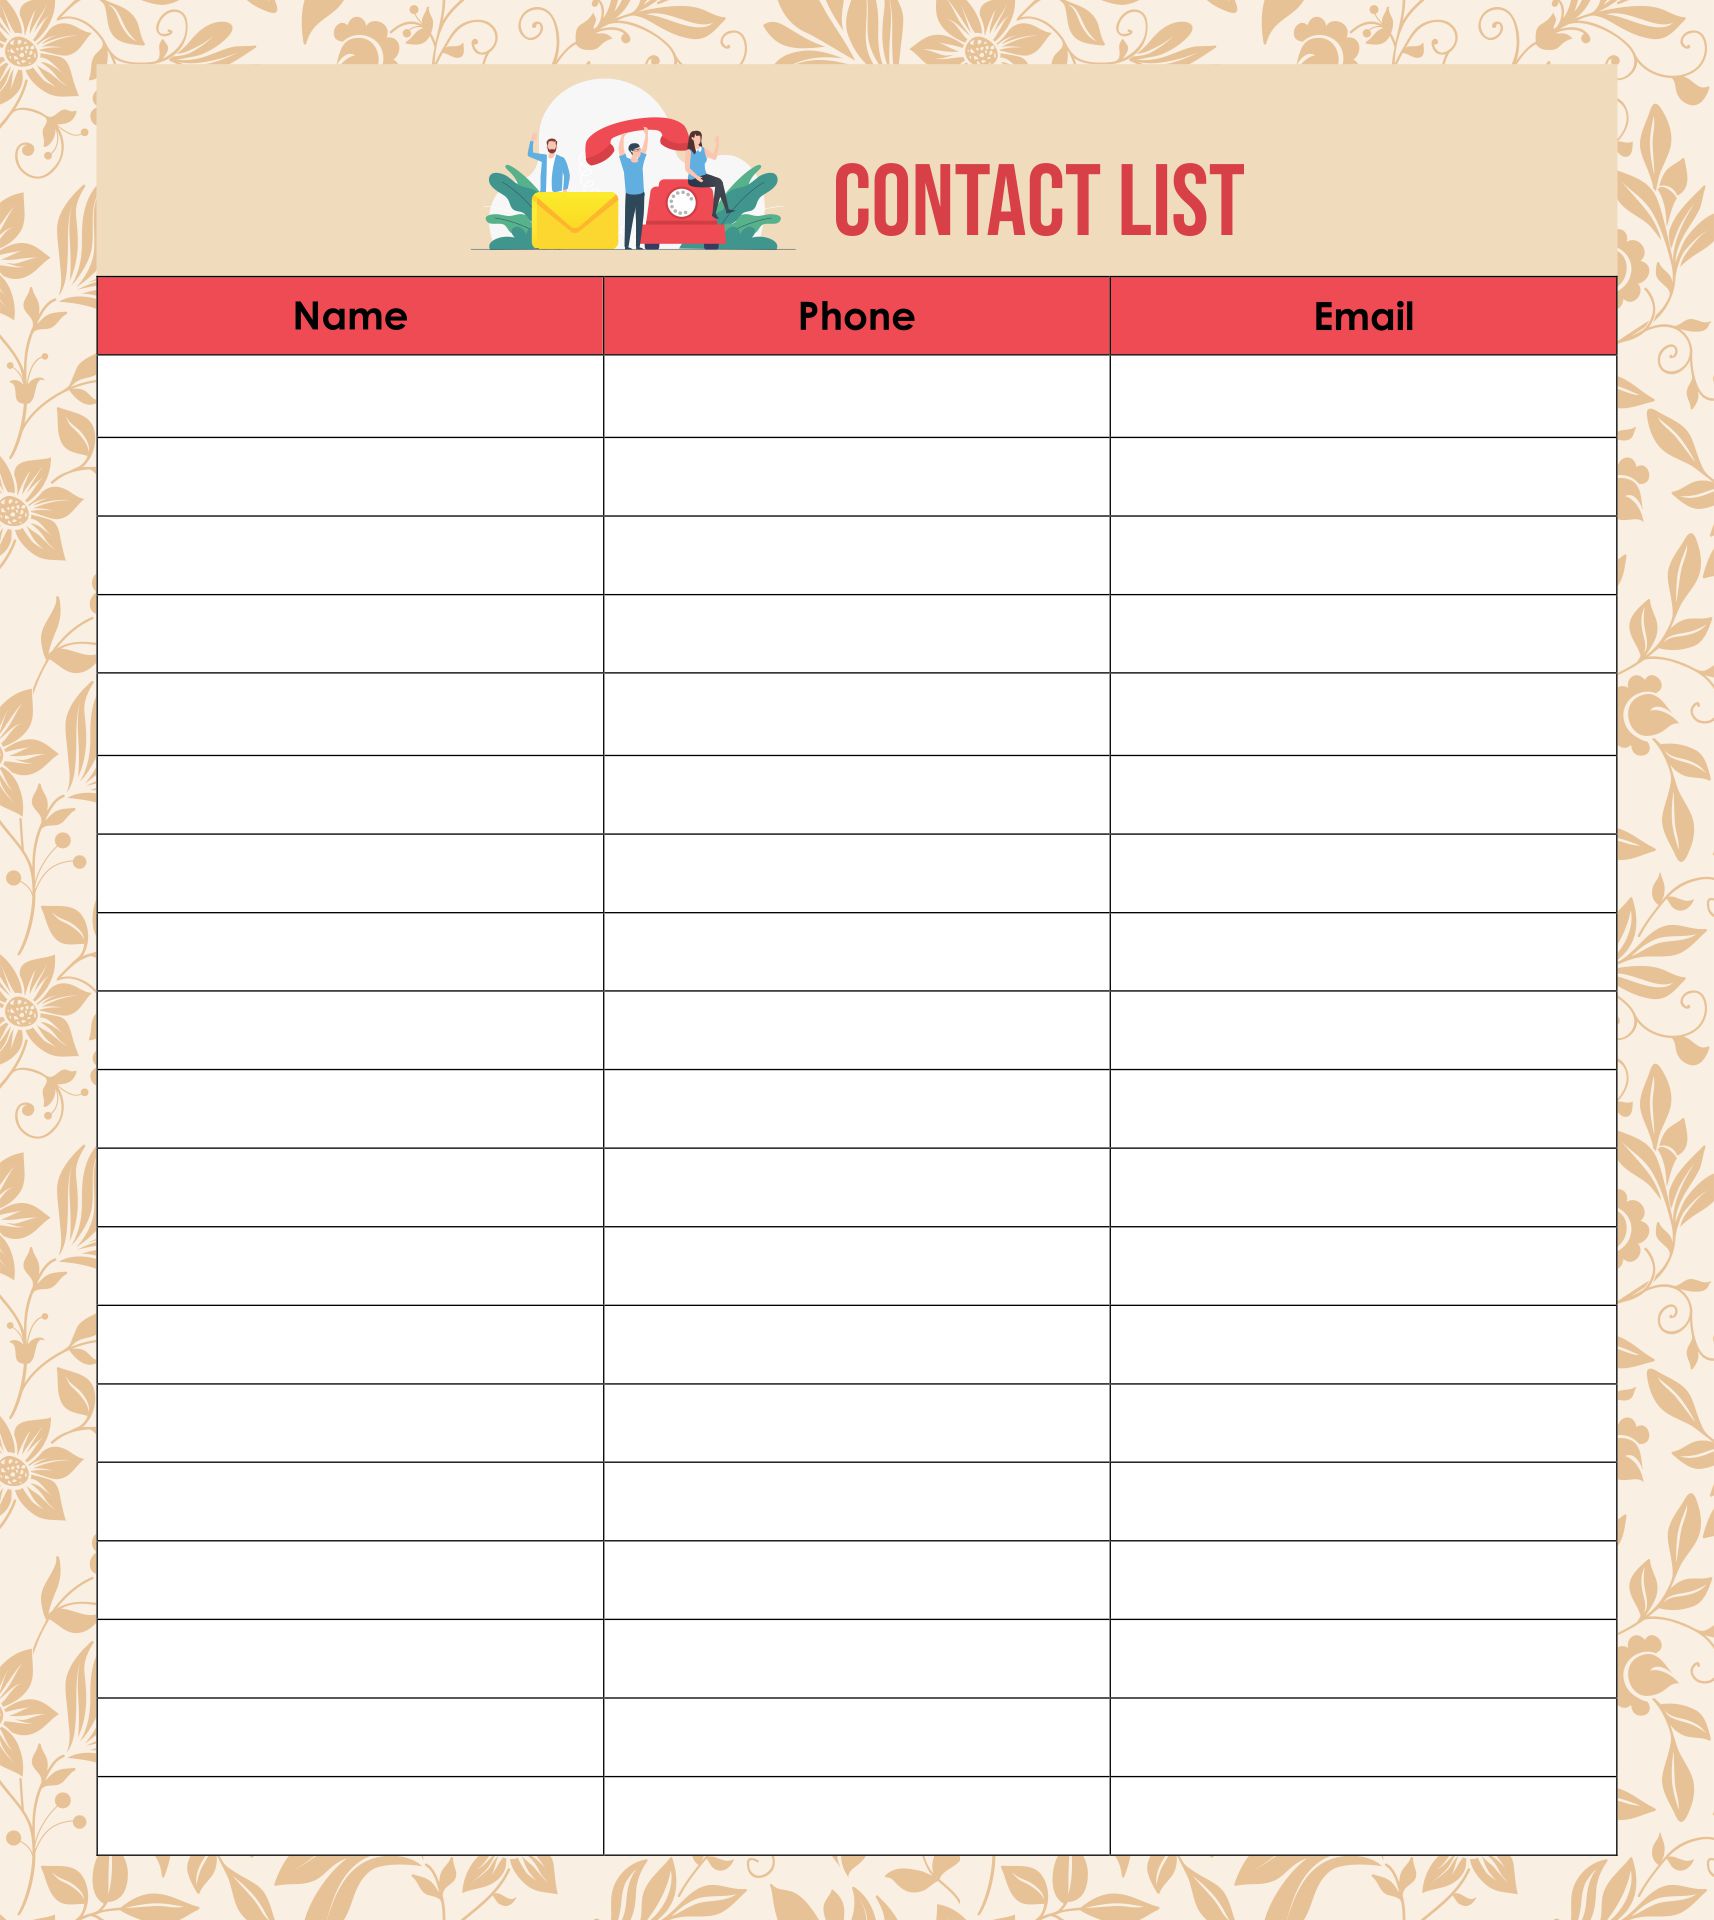 7-best-images-of-phone-contact-list-template-printable-printable